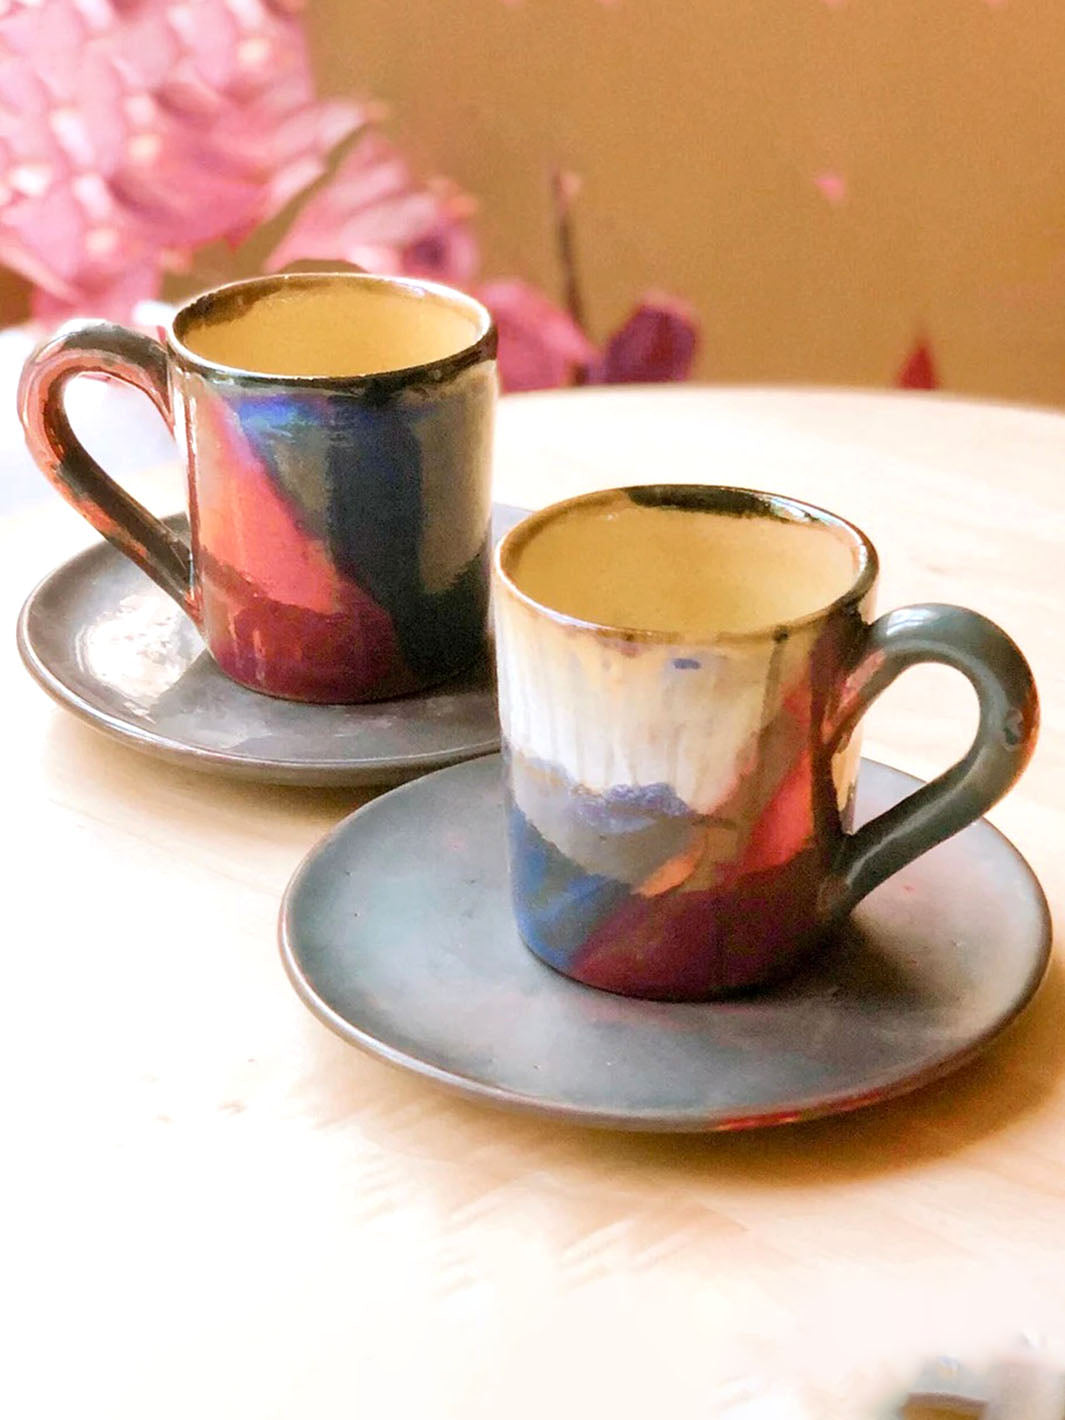 Handcrafted Artistic Abstract Multi Colored Coffee/Espresso Ceramic Cup